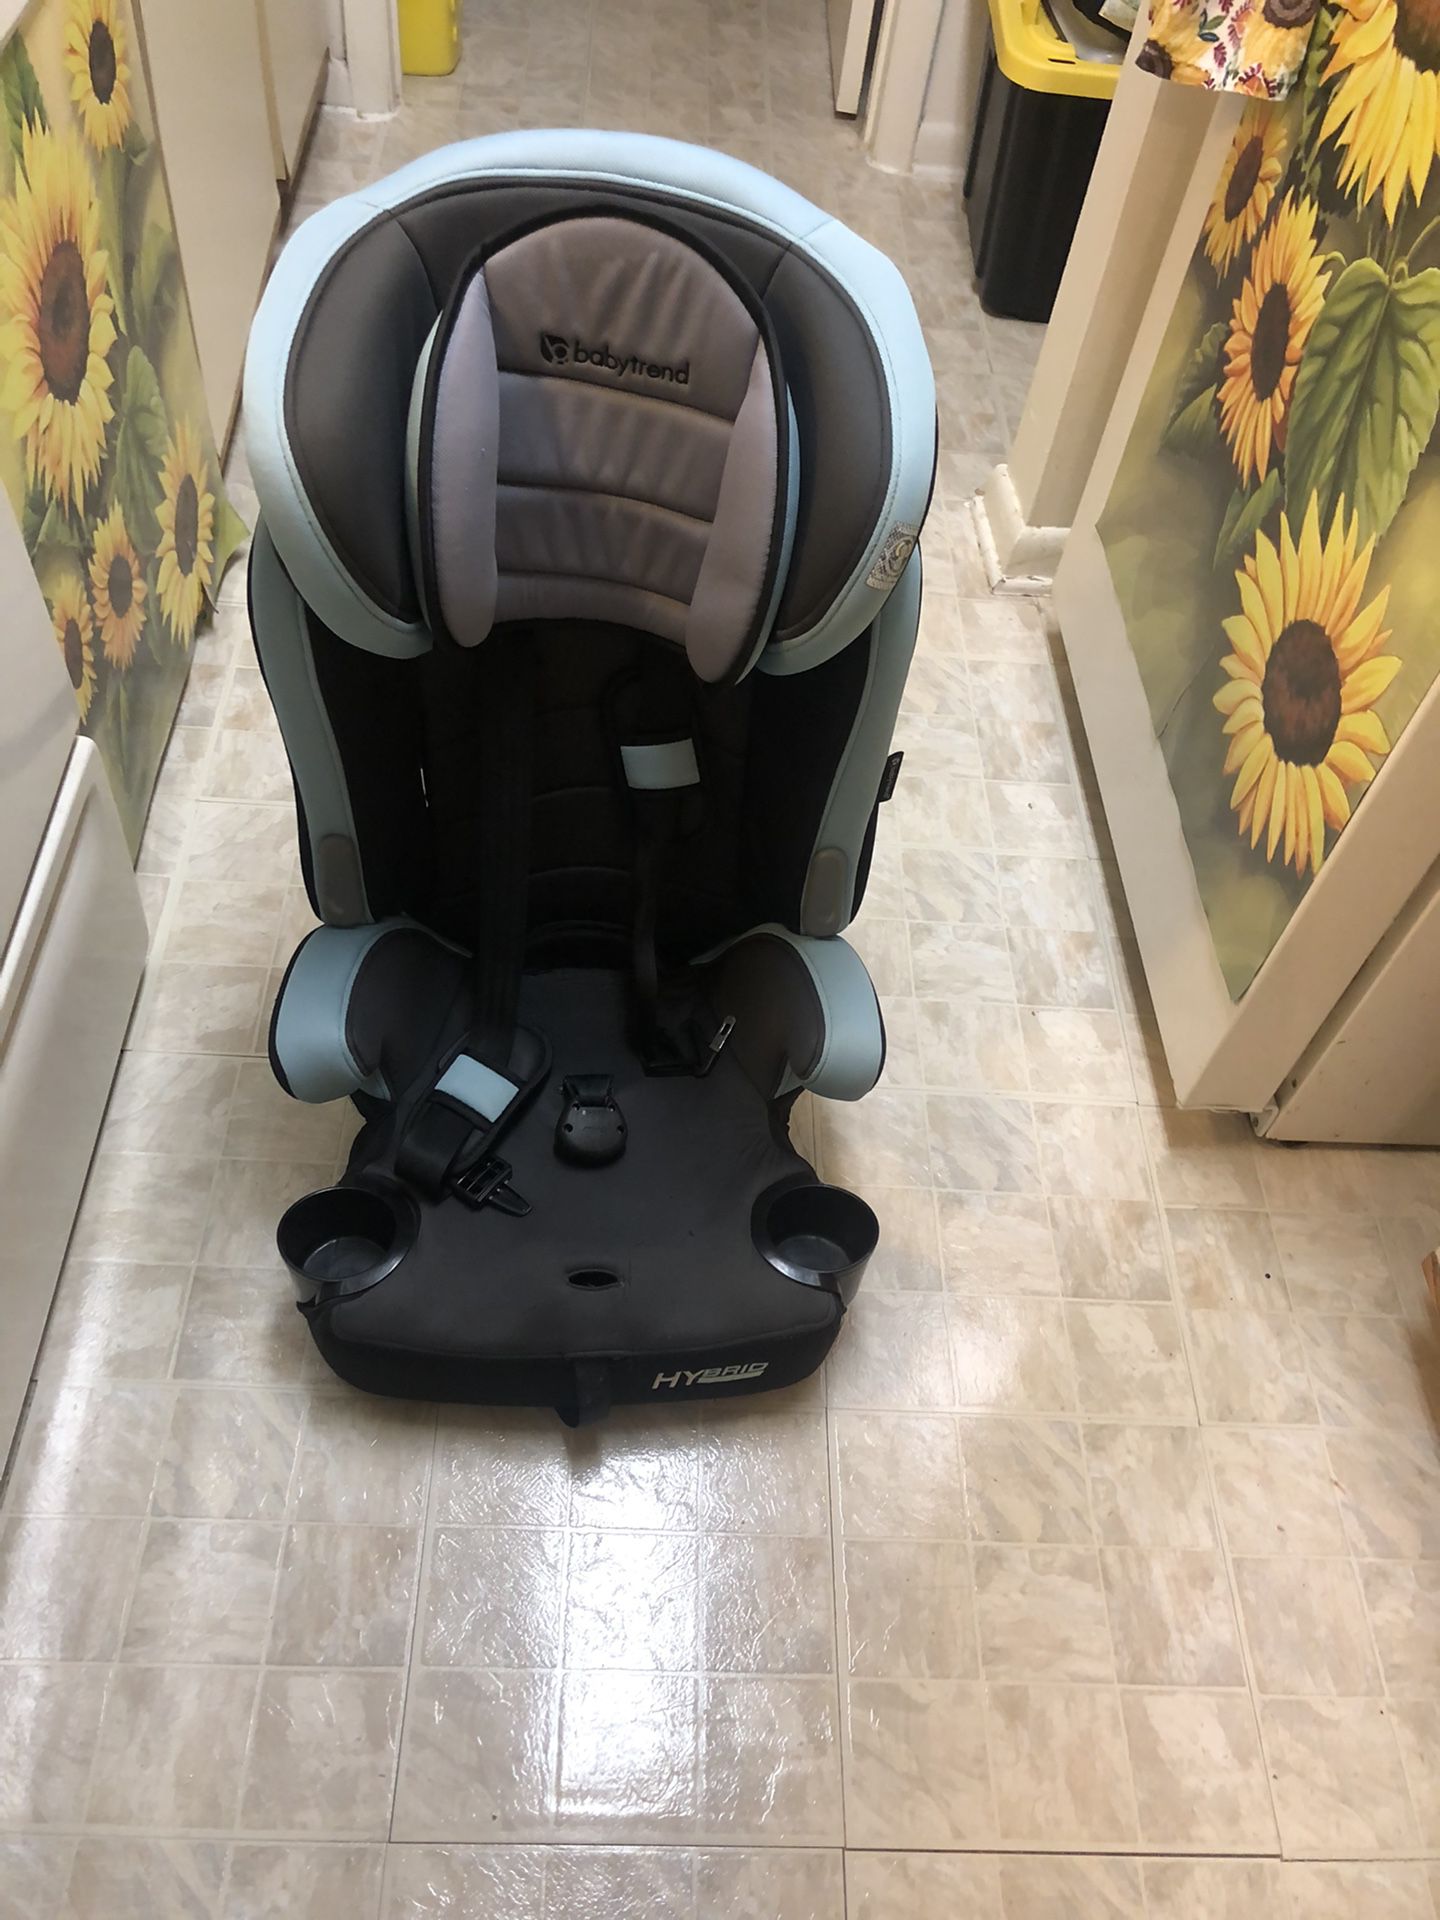 Baby Blue Boys Booster Seat Asking For $45 Thanks Don’t Miss Out 